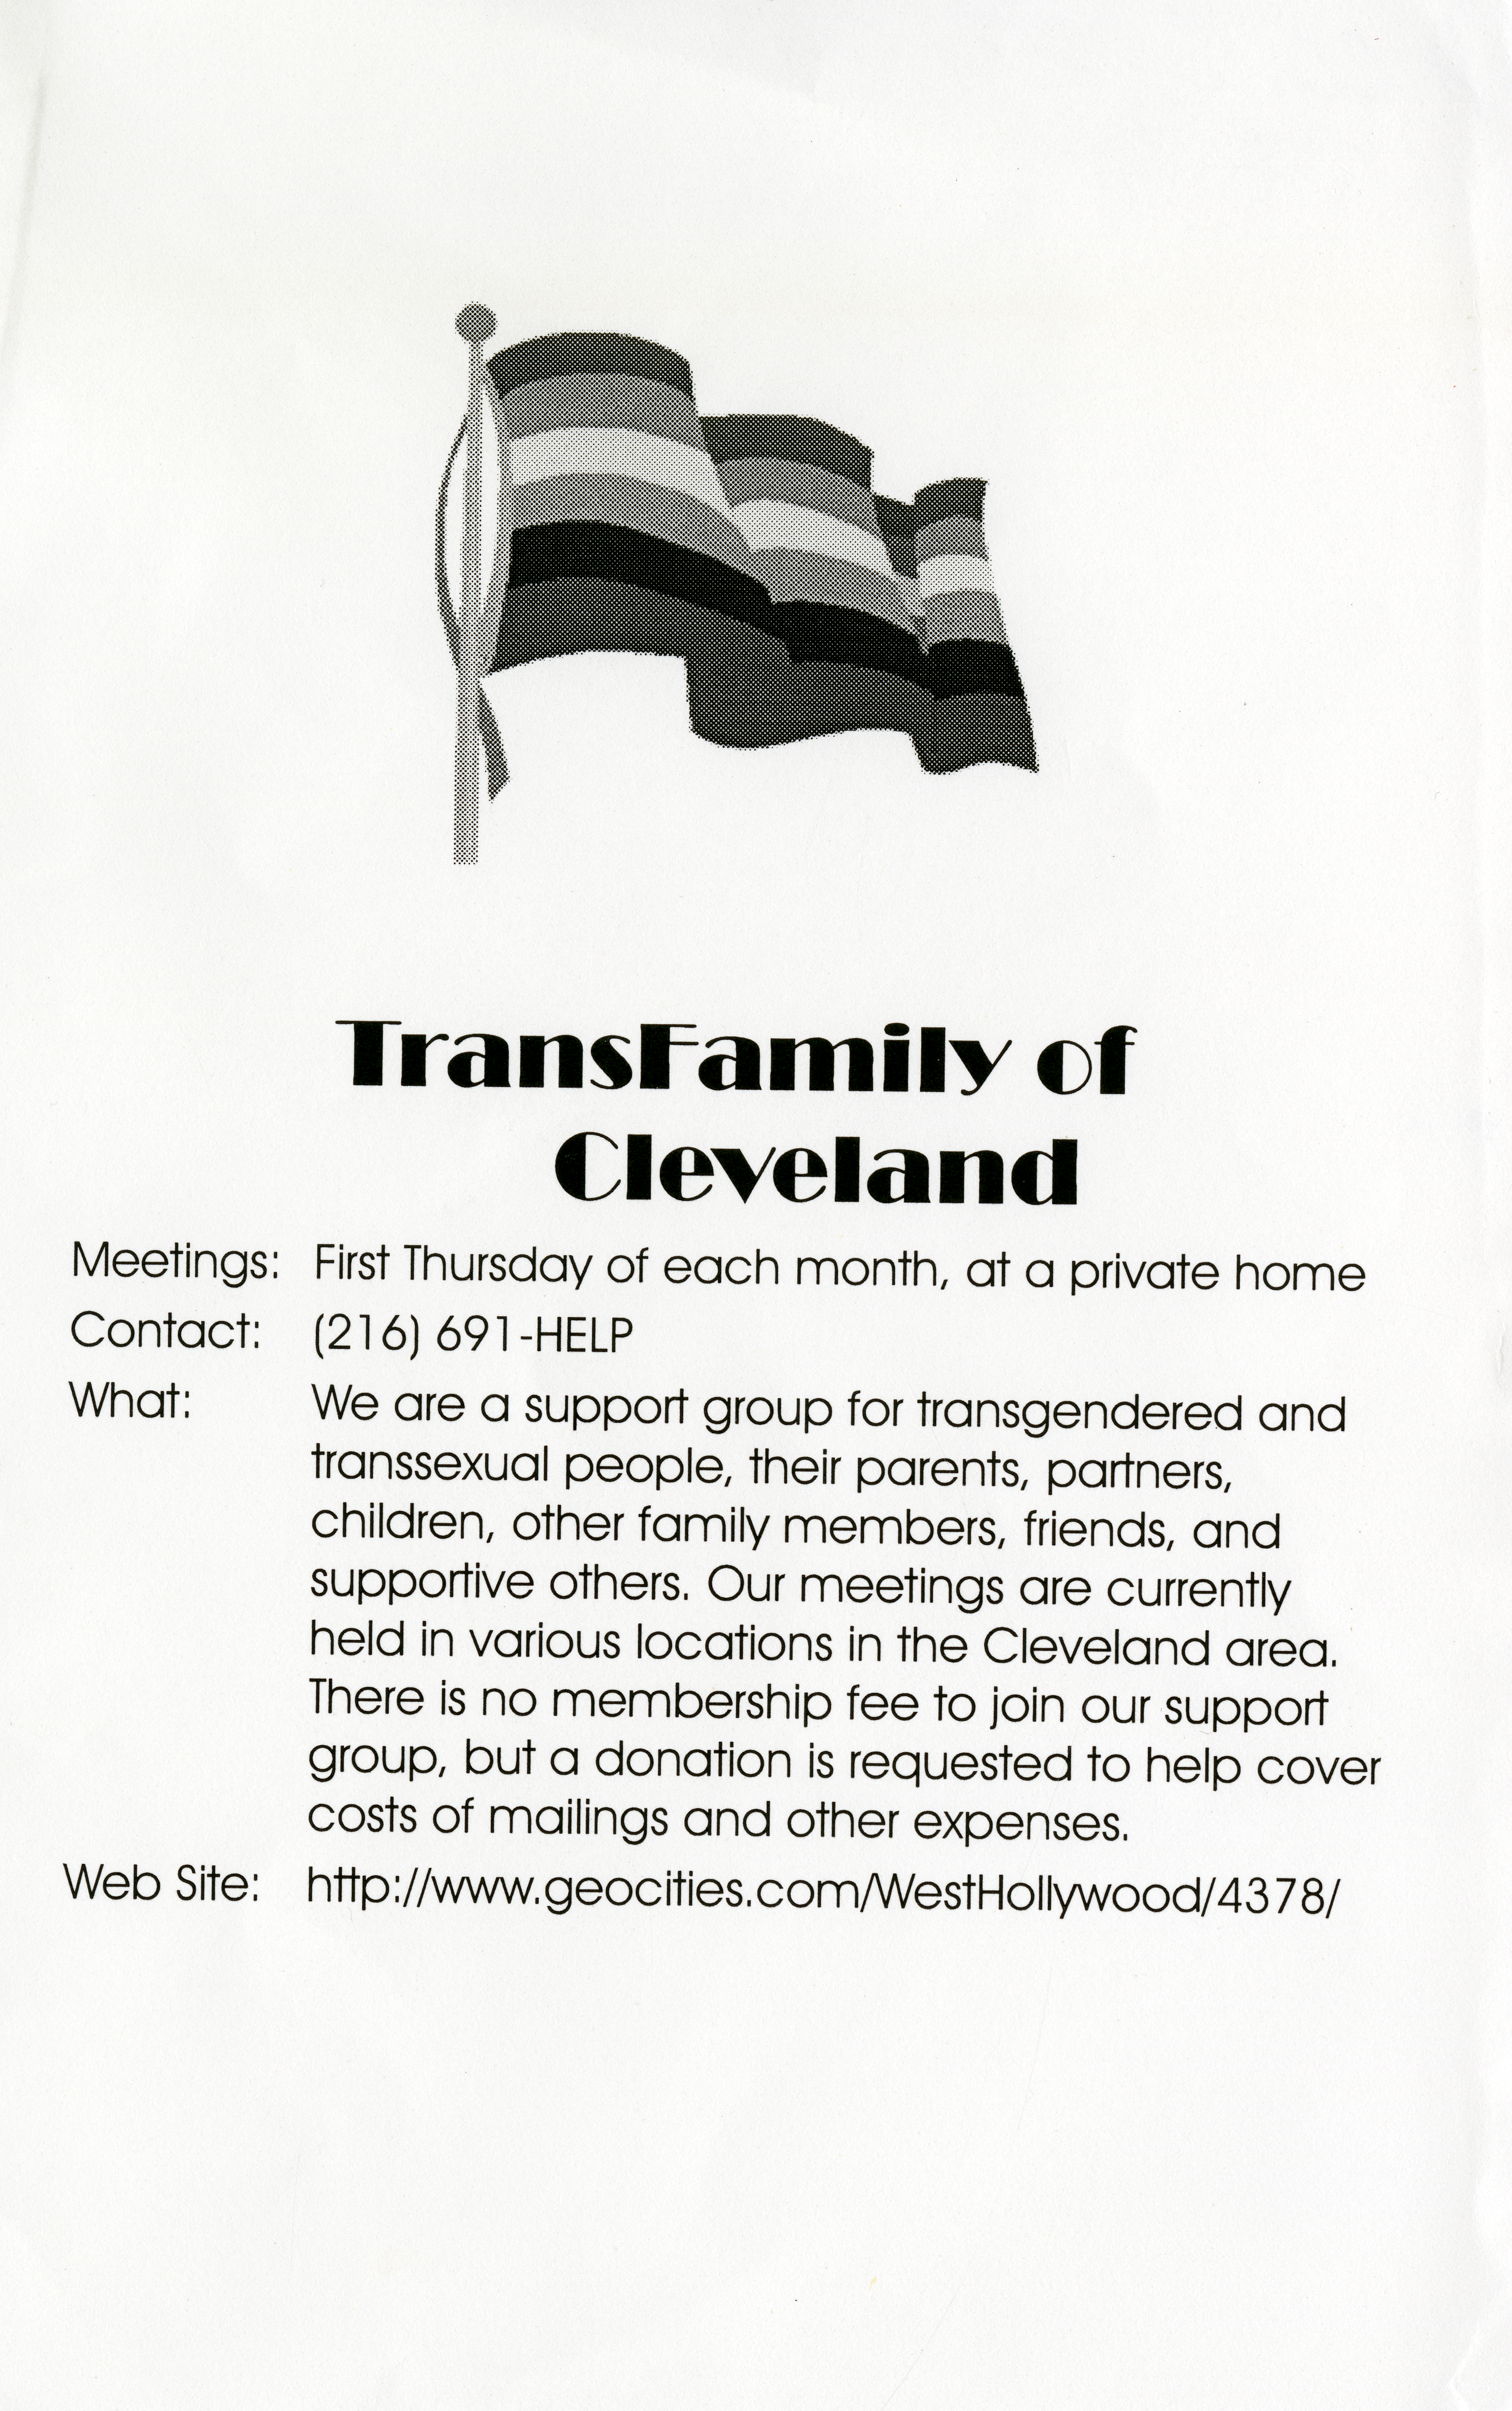 Pride Flyer from TransFamily in 1997.